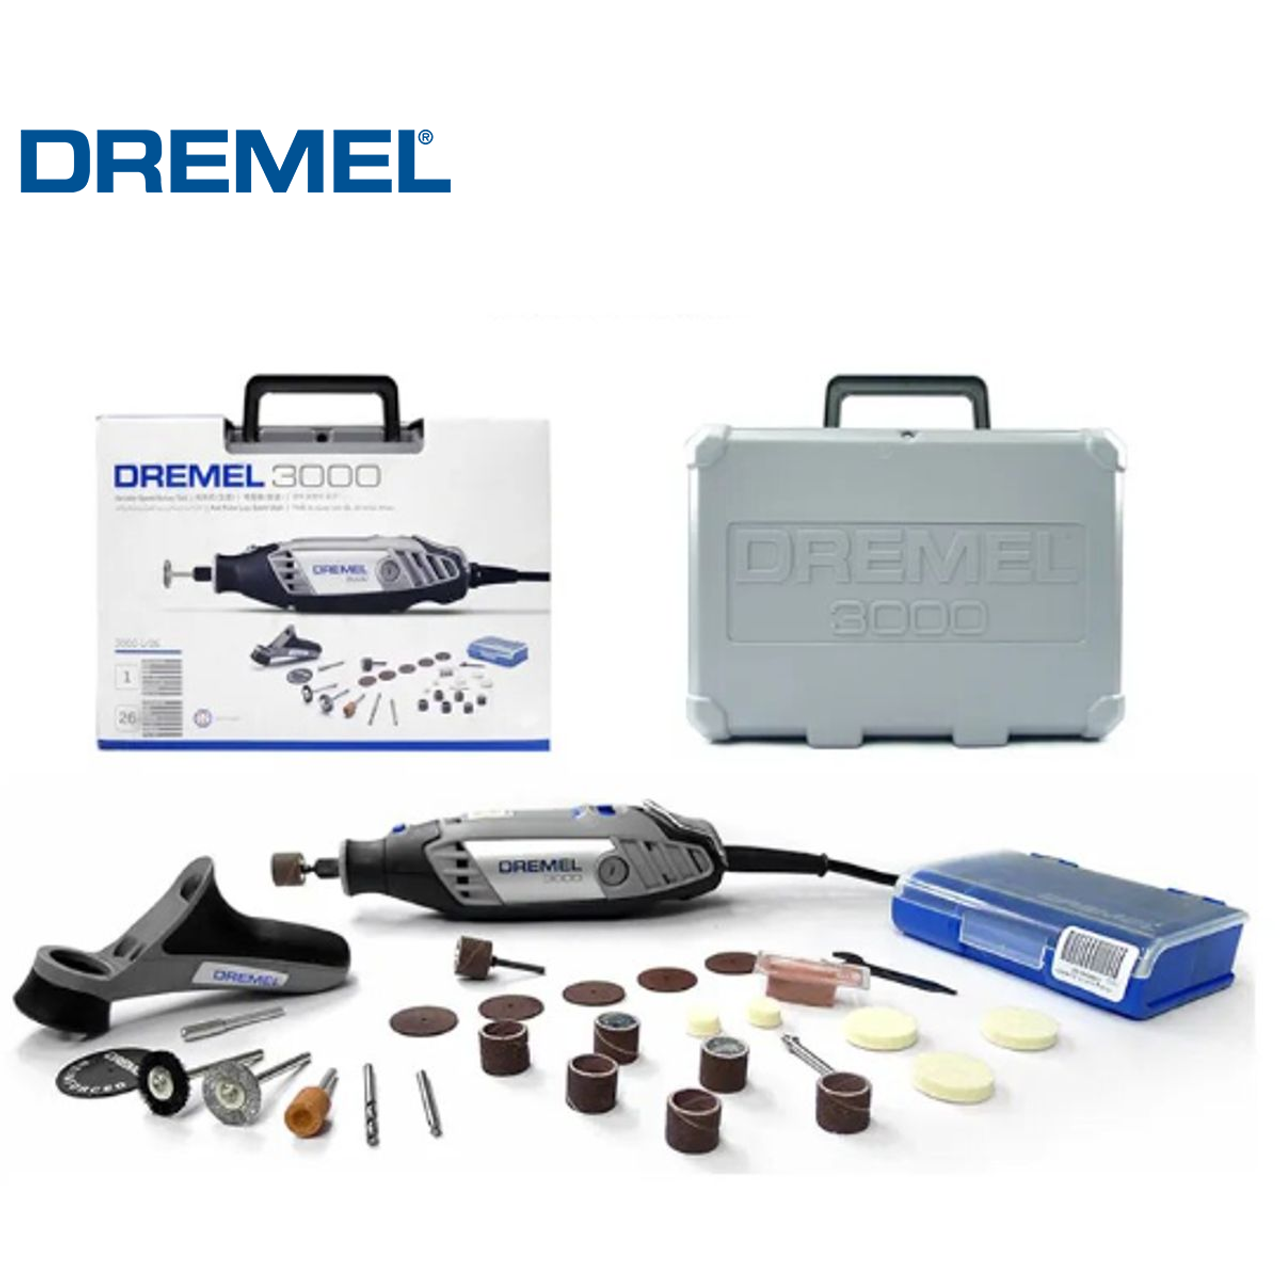 Recertified - Dremel 3000-1/26 Variable Speed Rotary Tool Kit 26 Accessories and Case - Grey